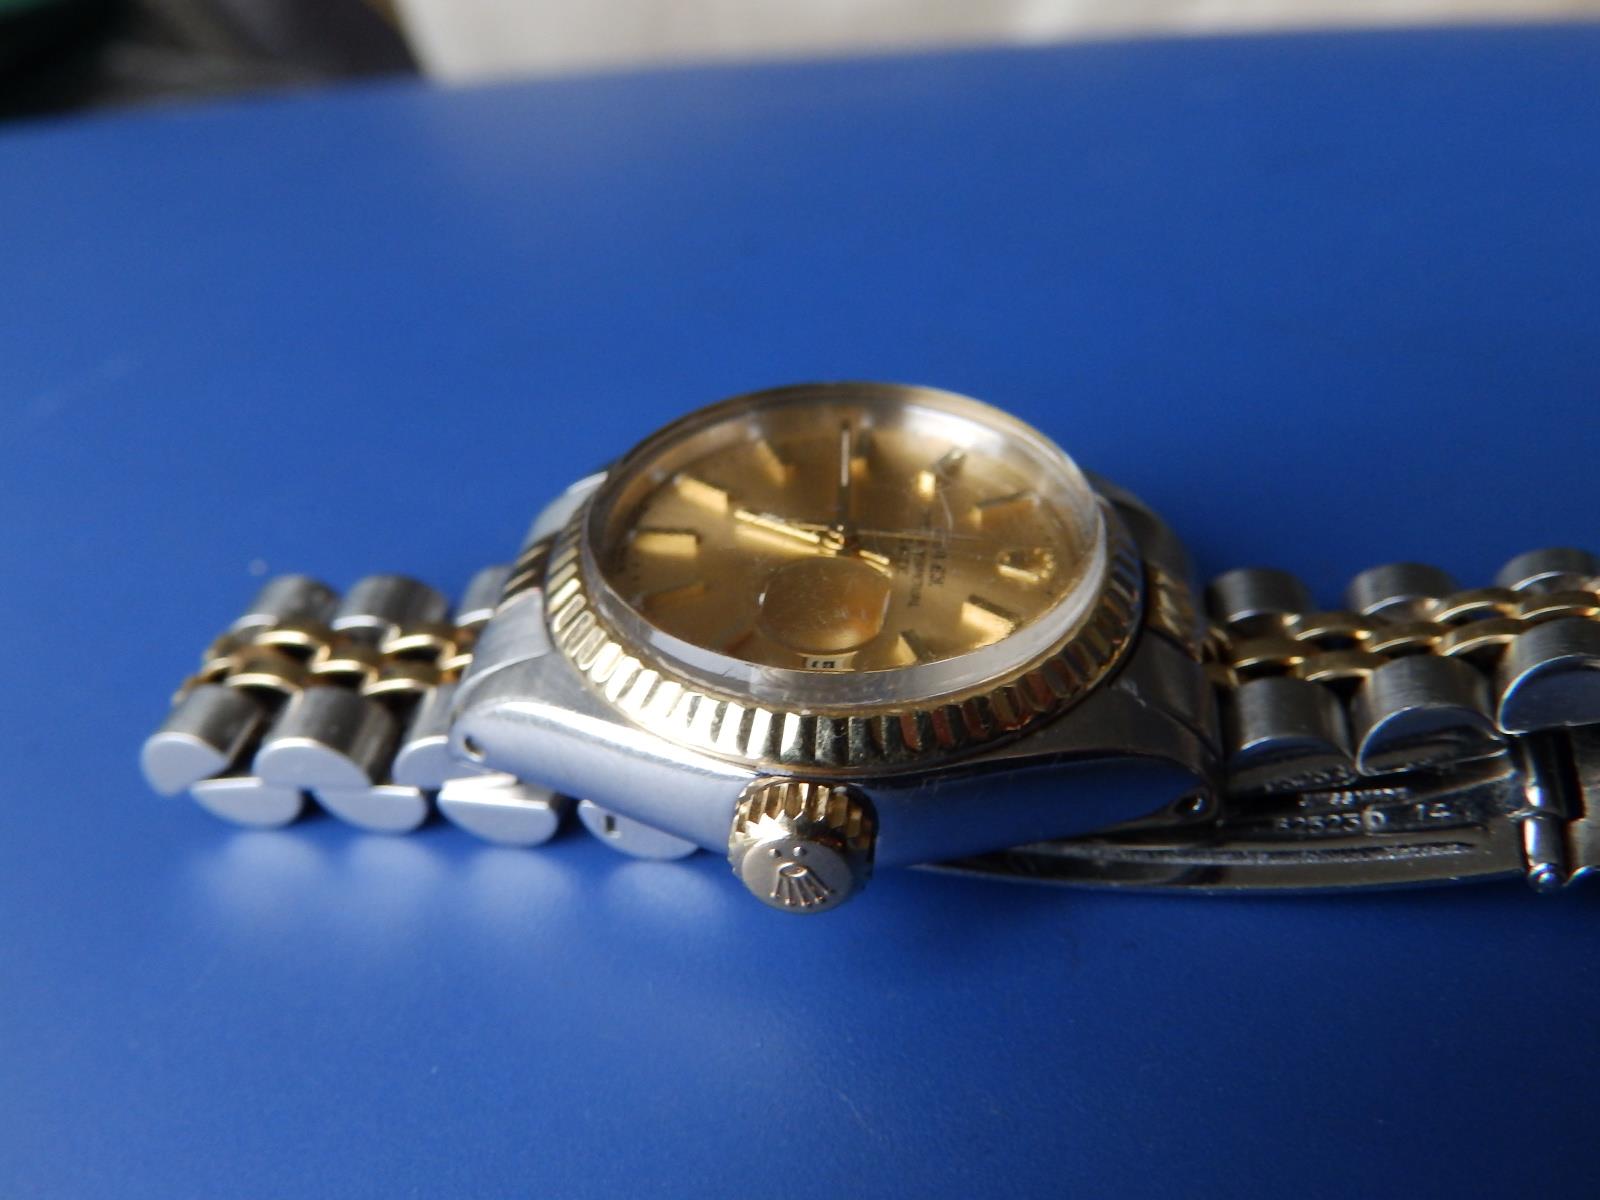 A ladies stainless steel and gold Rolex Oyster Perpetual Date bracelet wrist watch with gold dial, - Image 6 of 7